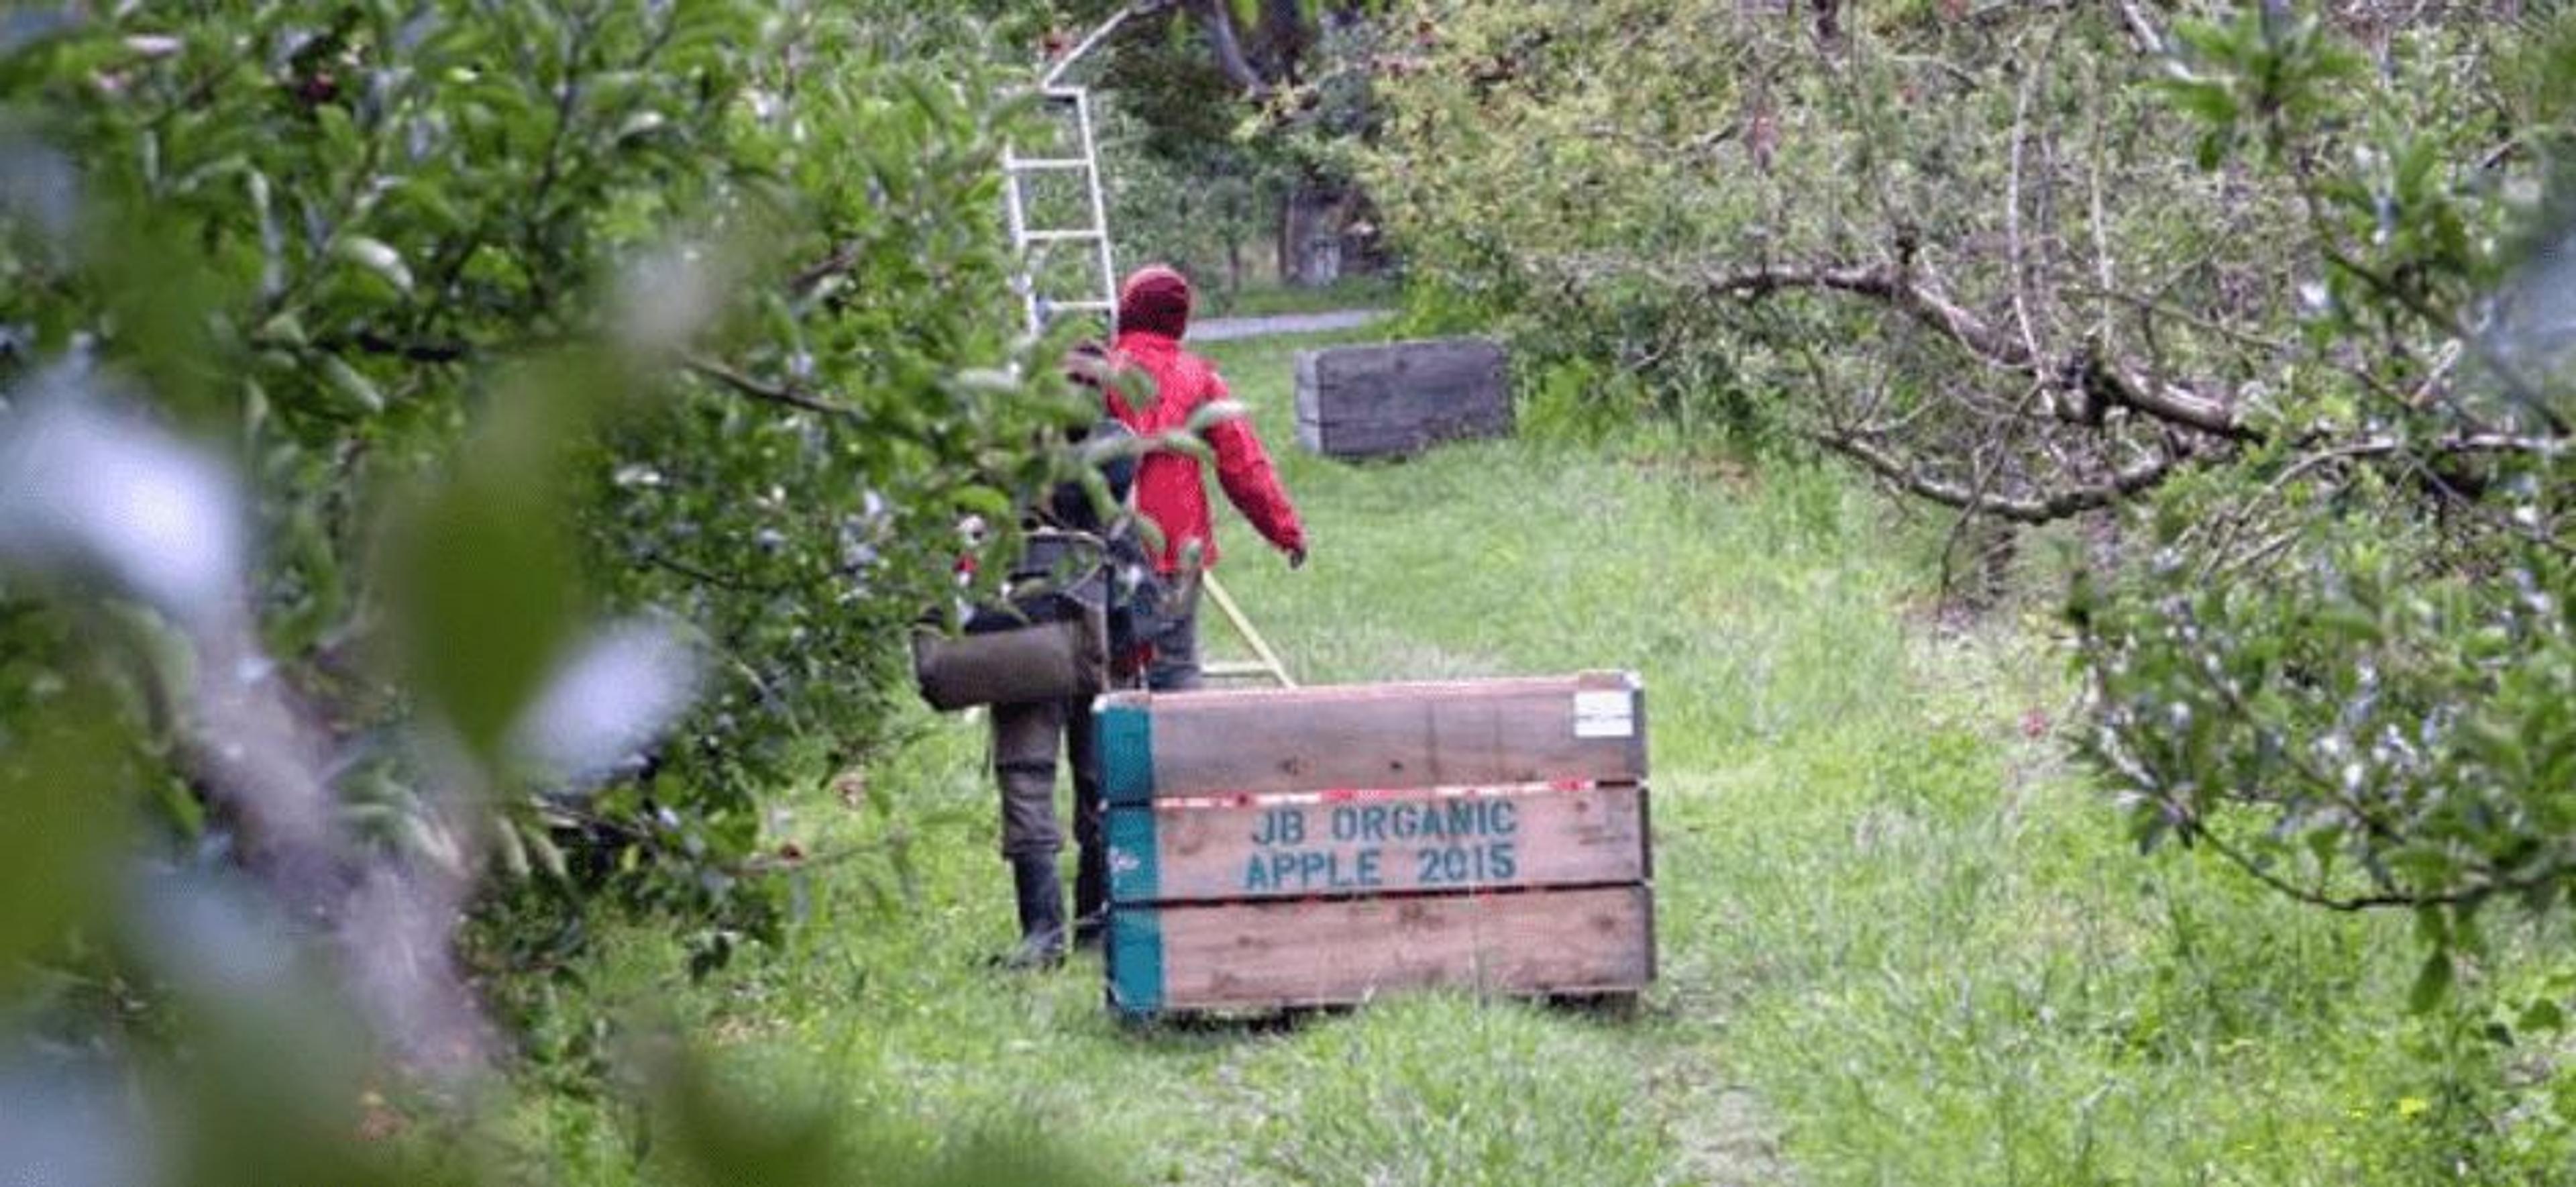 A Pacific contracting company is finding it tough to hire people to work in Hawkes Bay orchards. Photo/RNZ